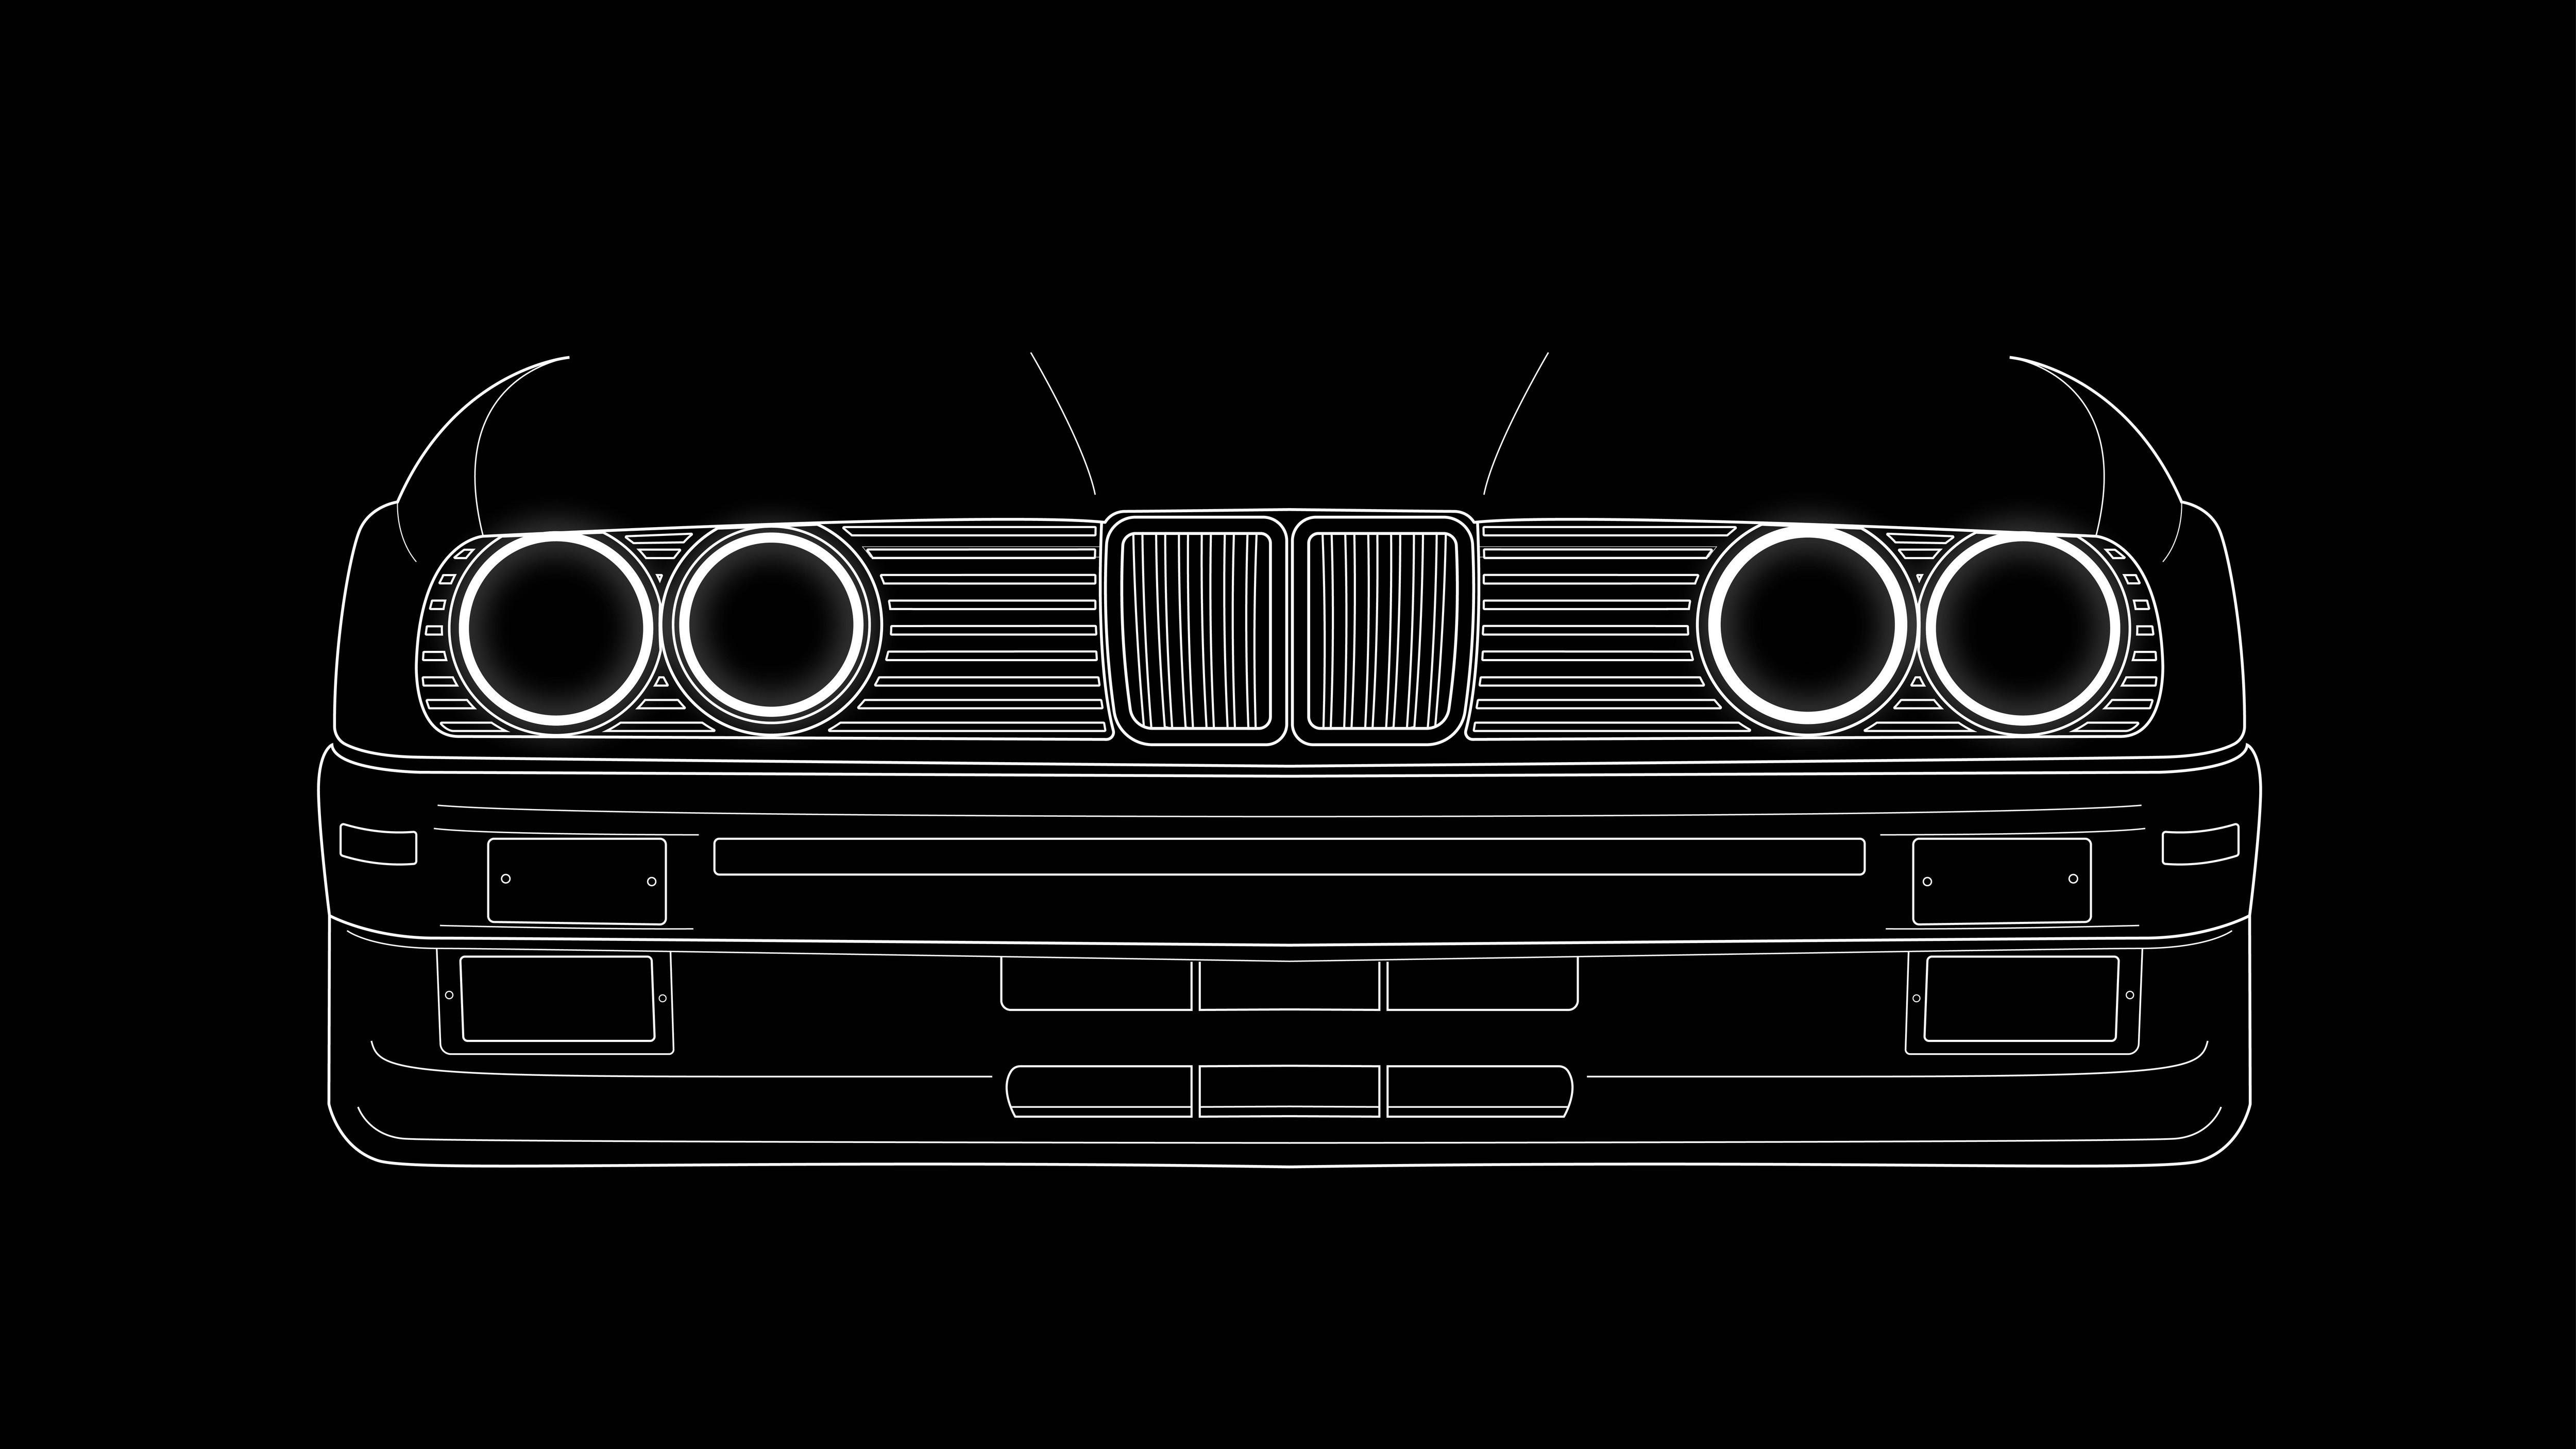 A black and white drawing of an old car - BMW